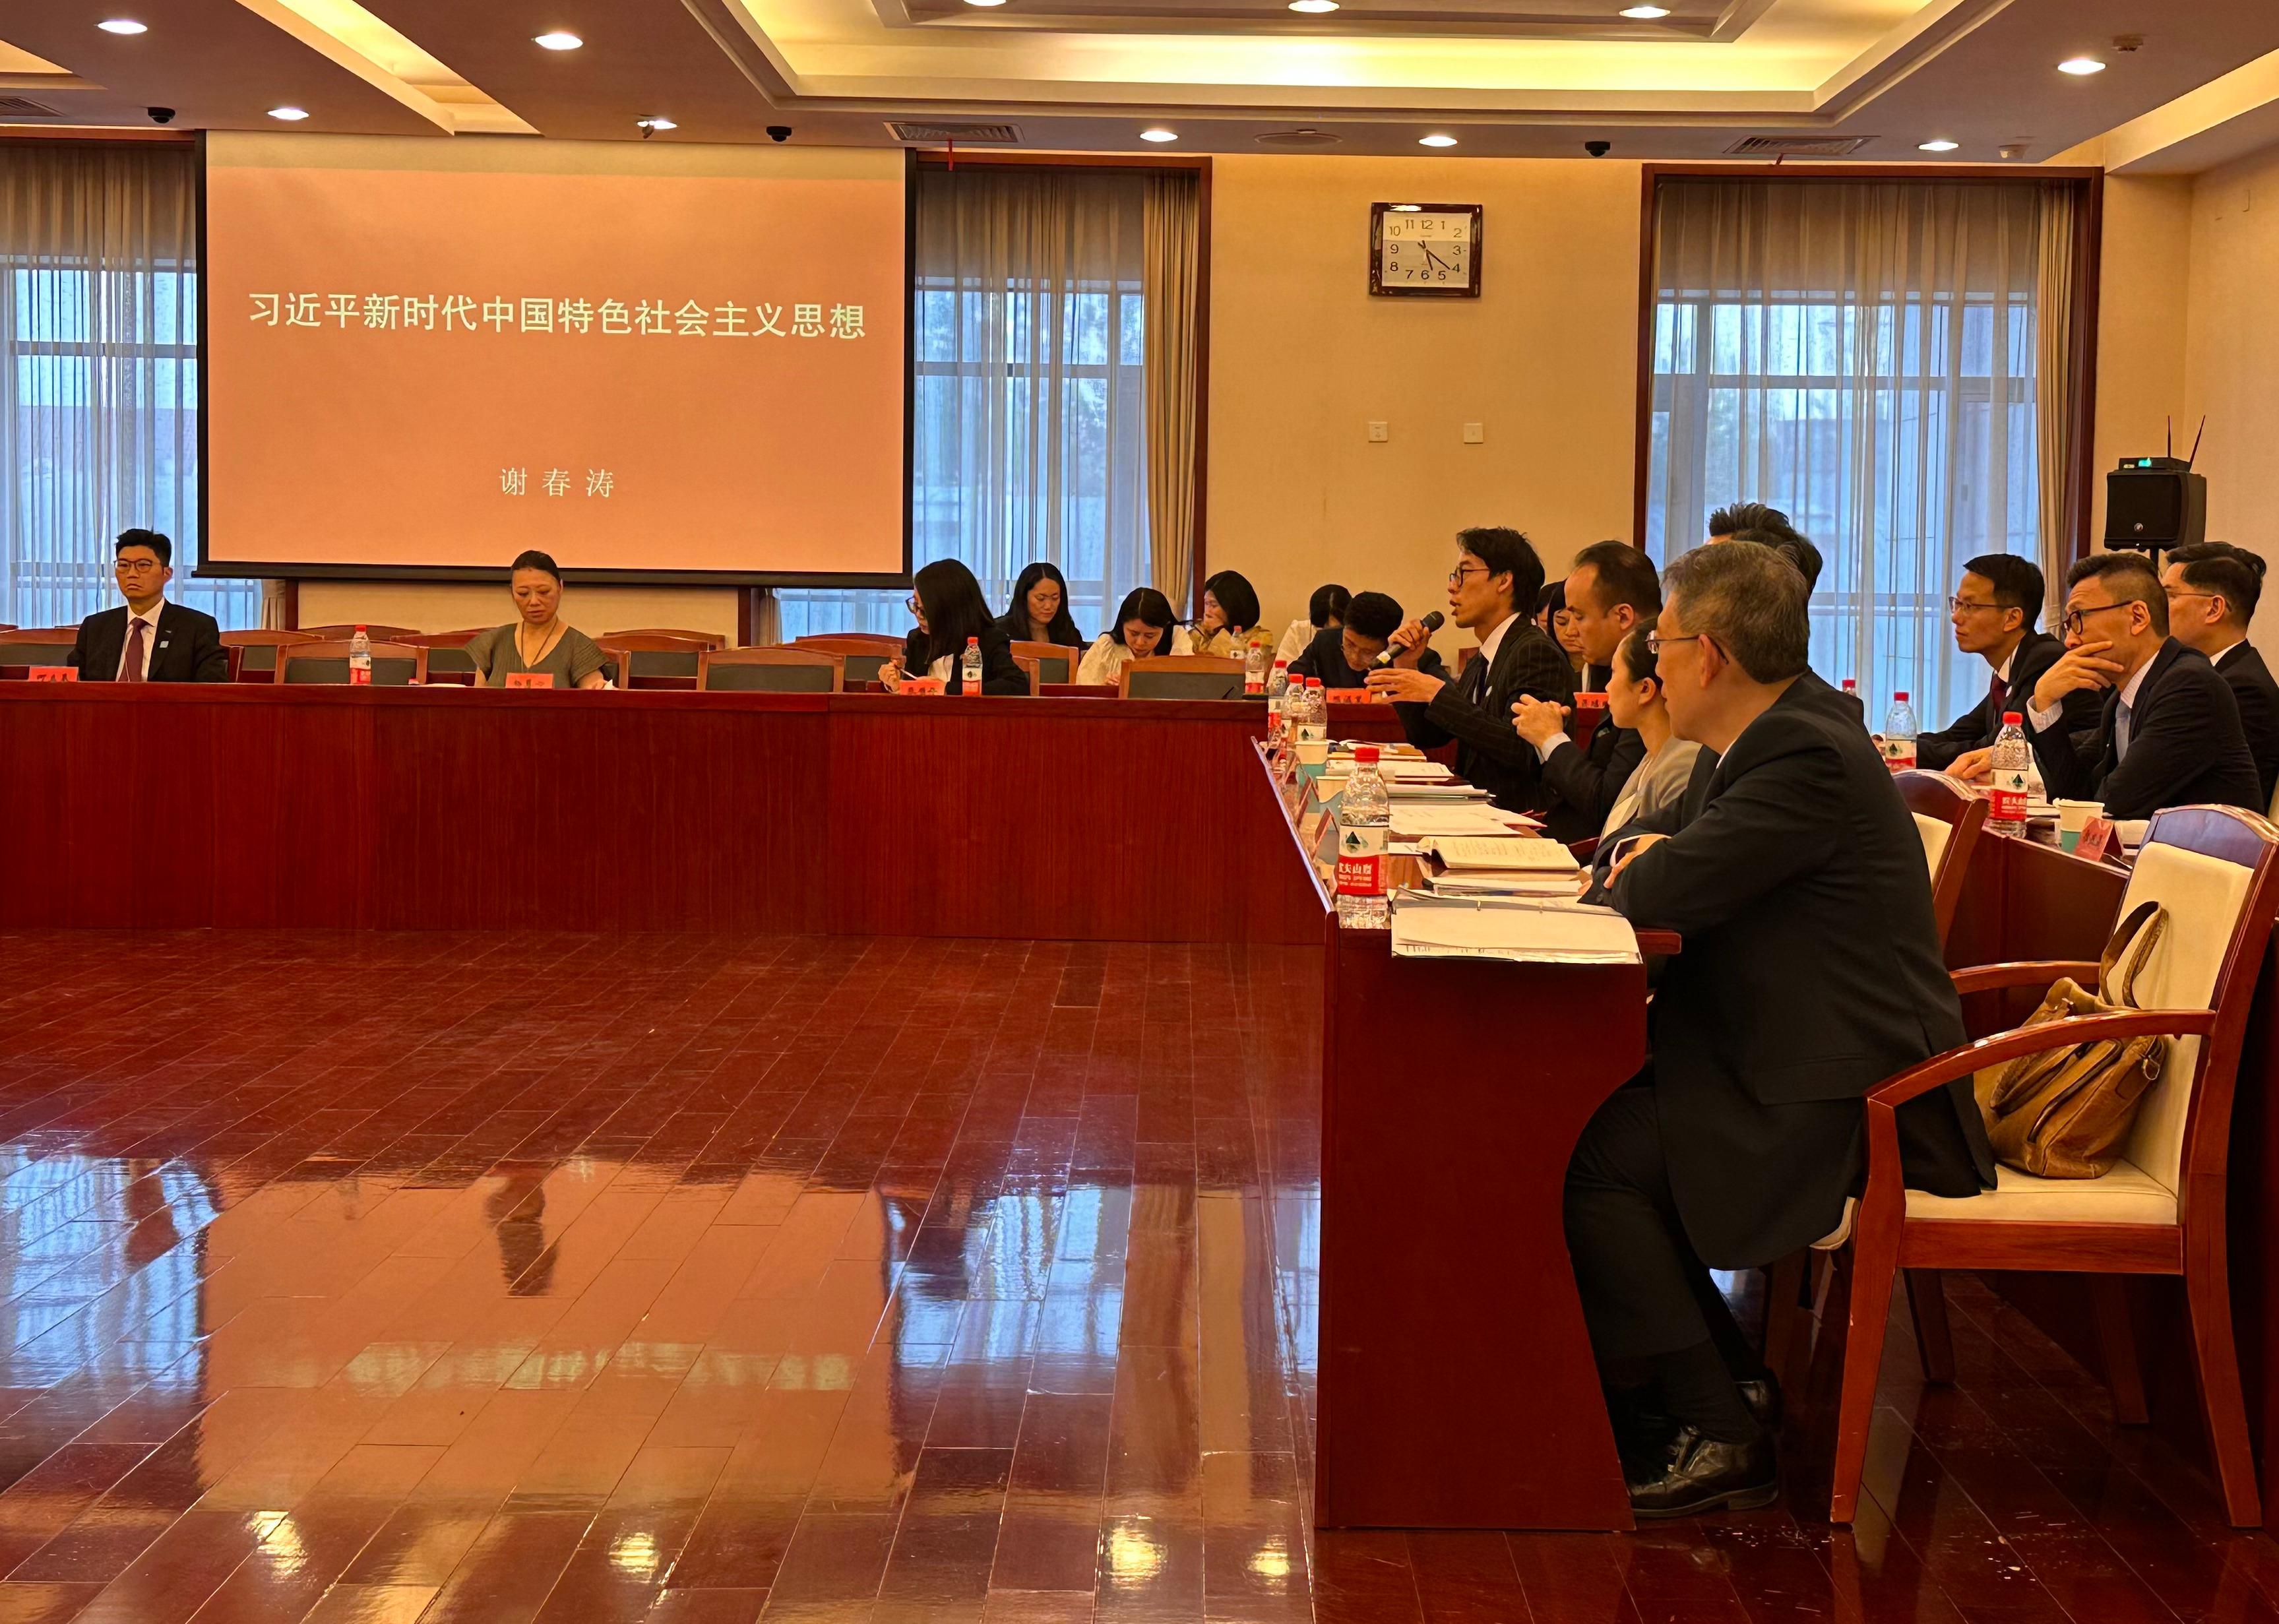 The Executive Vice President of the National Academy of Governance, Mr Xie Chuntao today (April 17) gave lecture on the Xi Jinping Thought on Socialism with Chinese Characteristics for a New Era to the delegation of the District Officers of the Hong Kong Special Administrative Region Government for a study programme on district governance.